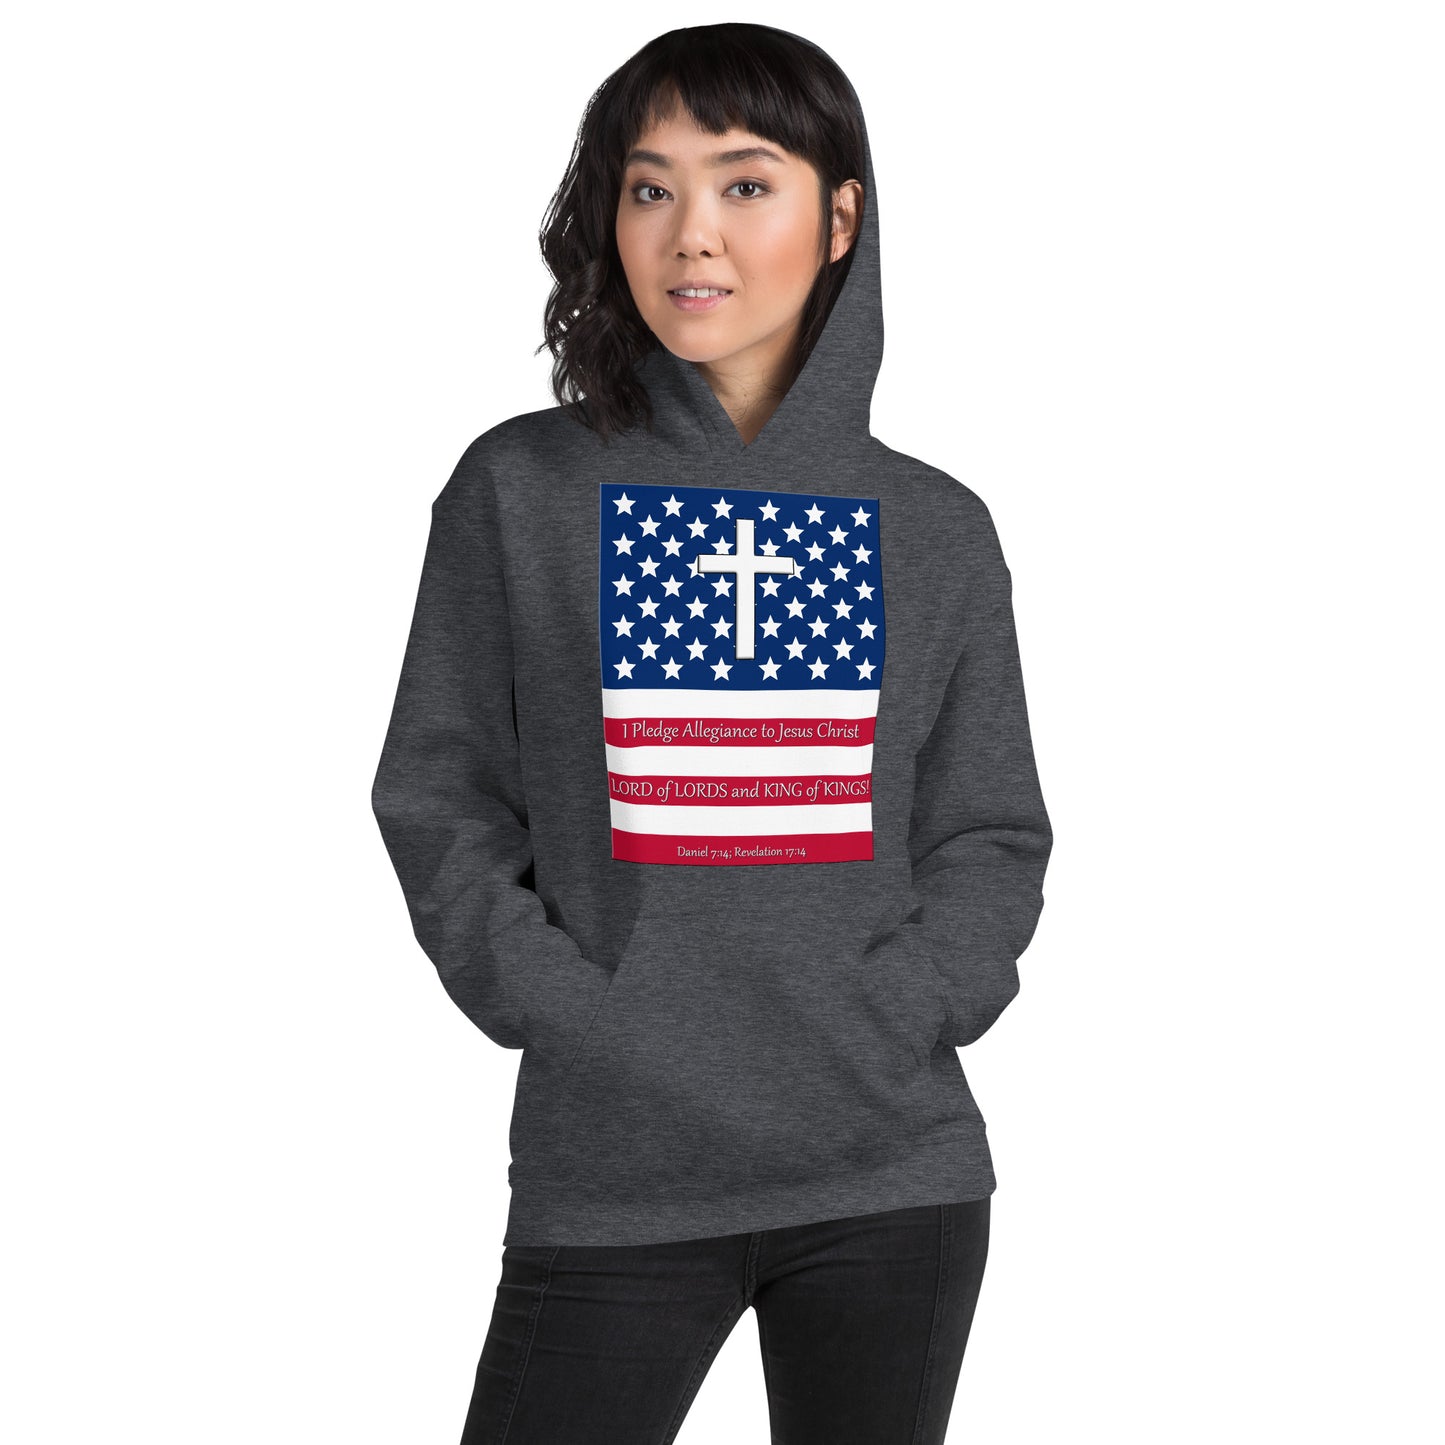 A019 Hoodie – Gildan 18500 Unisex Hoodie Featuring the Stars and Stripes, a Cross, and the Text “I Pledge Allegiance to Jesus Christ LORD of LORDS and KING of KINGS!”